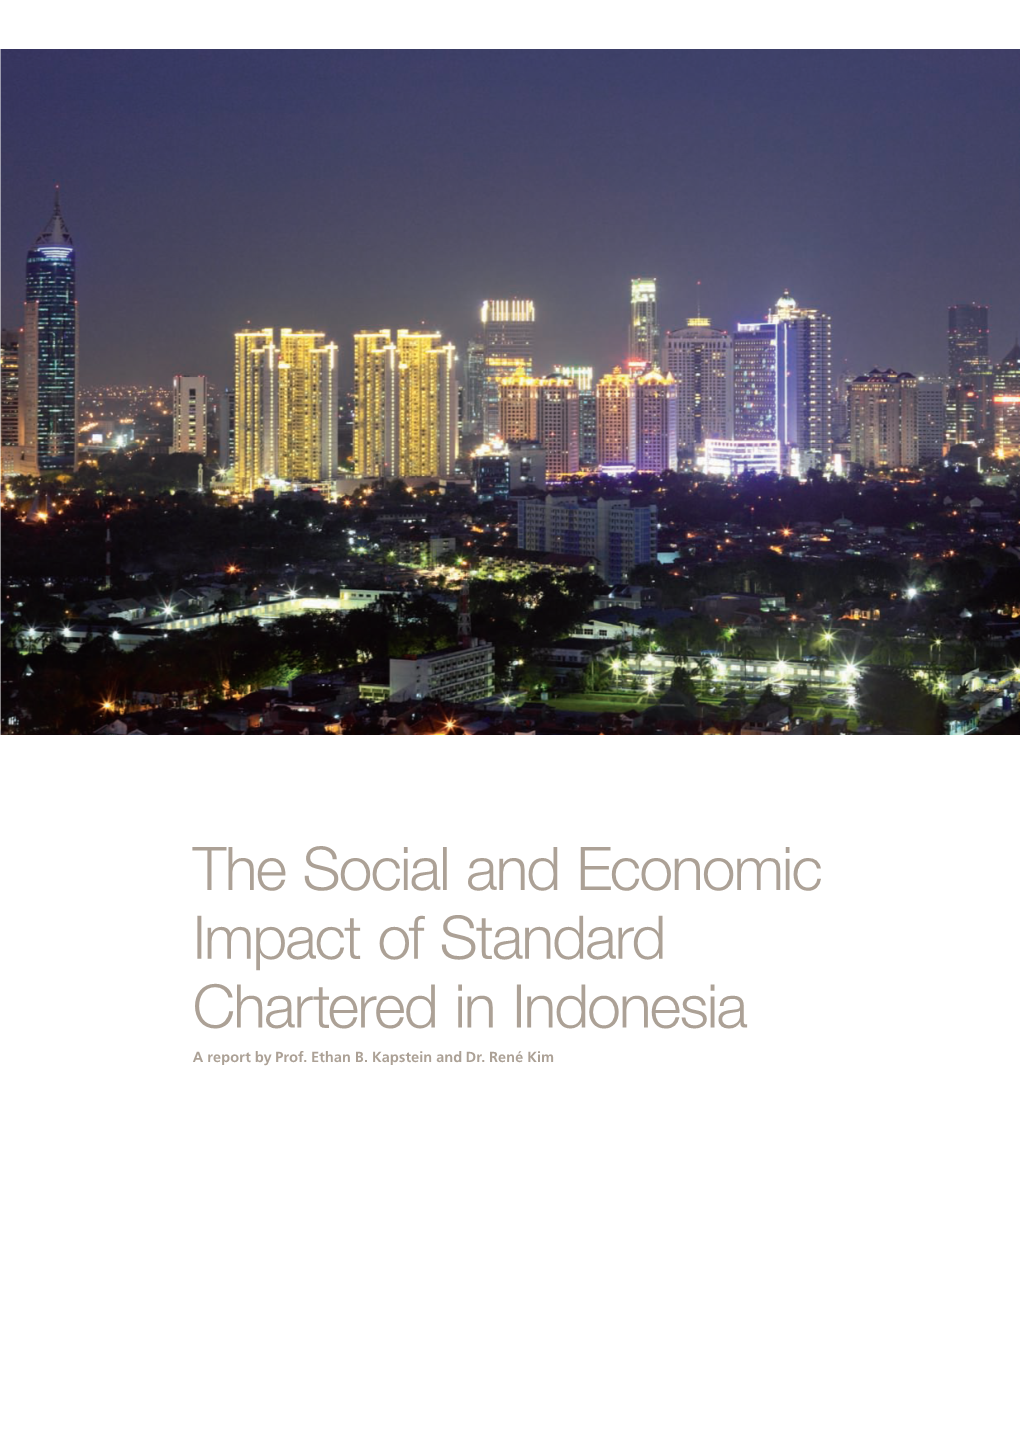 Indonesia Is the World’S Fourth Most Populous Nation